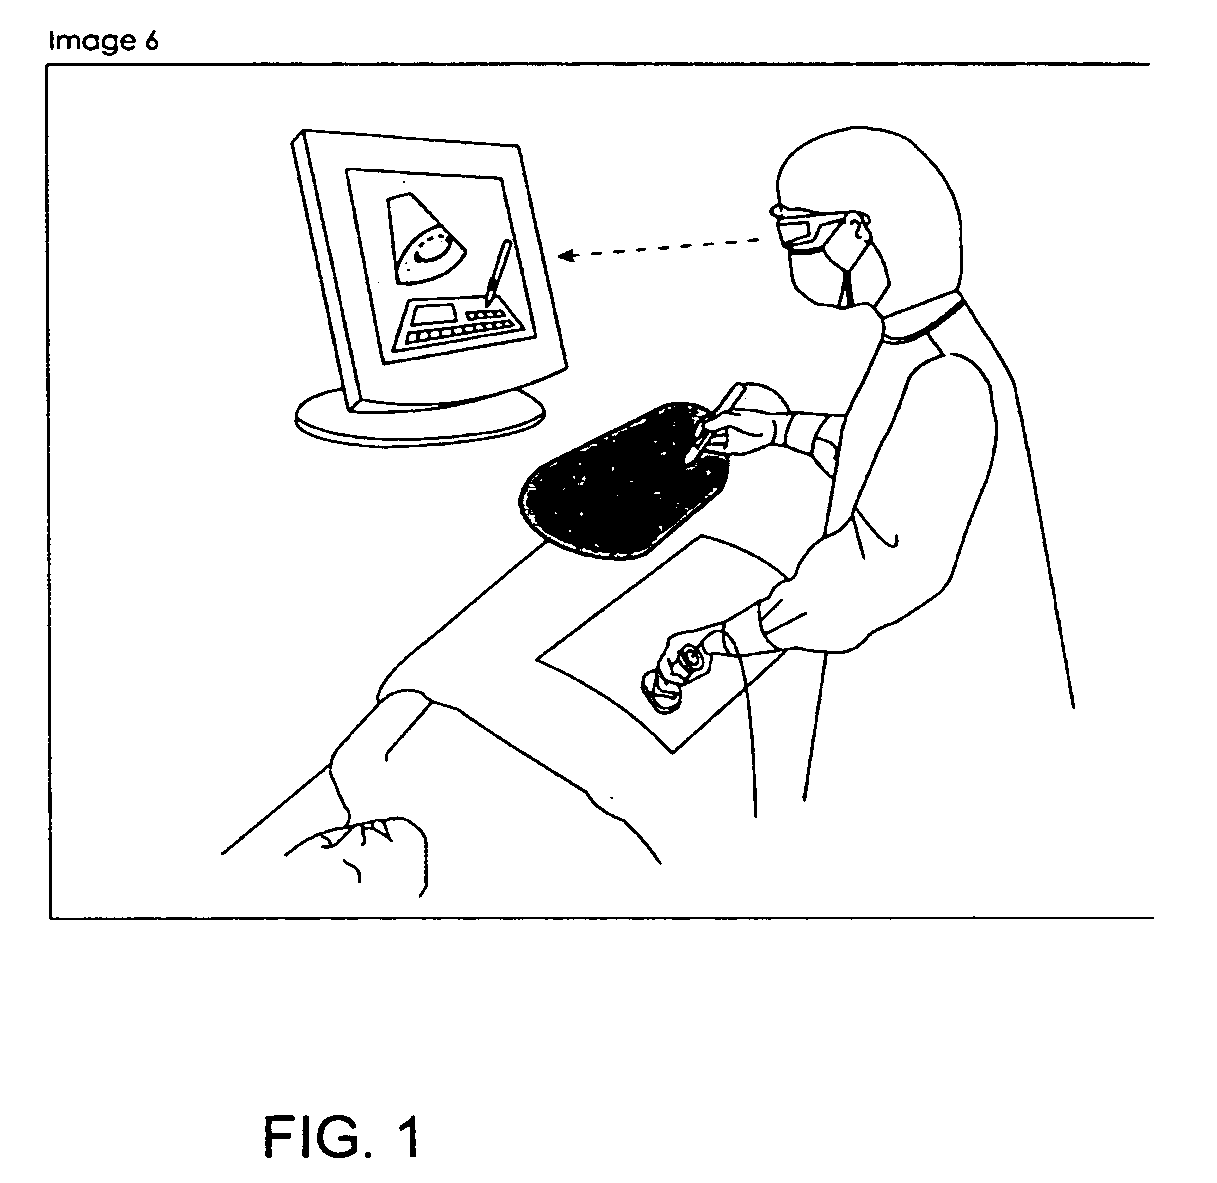 System and method for three-dimensional space management and visualization of ultrasound data ("SonoDEX")